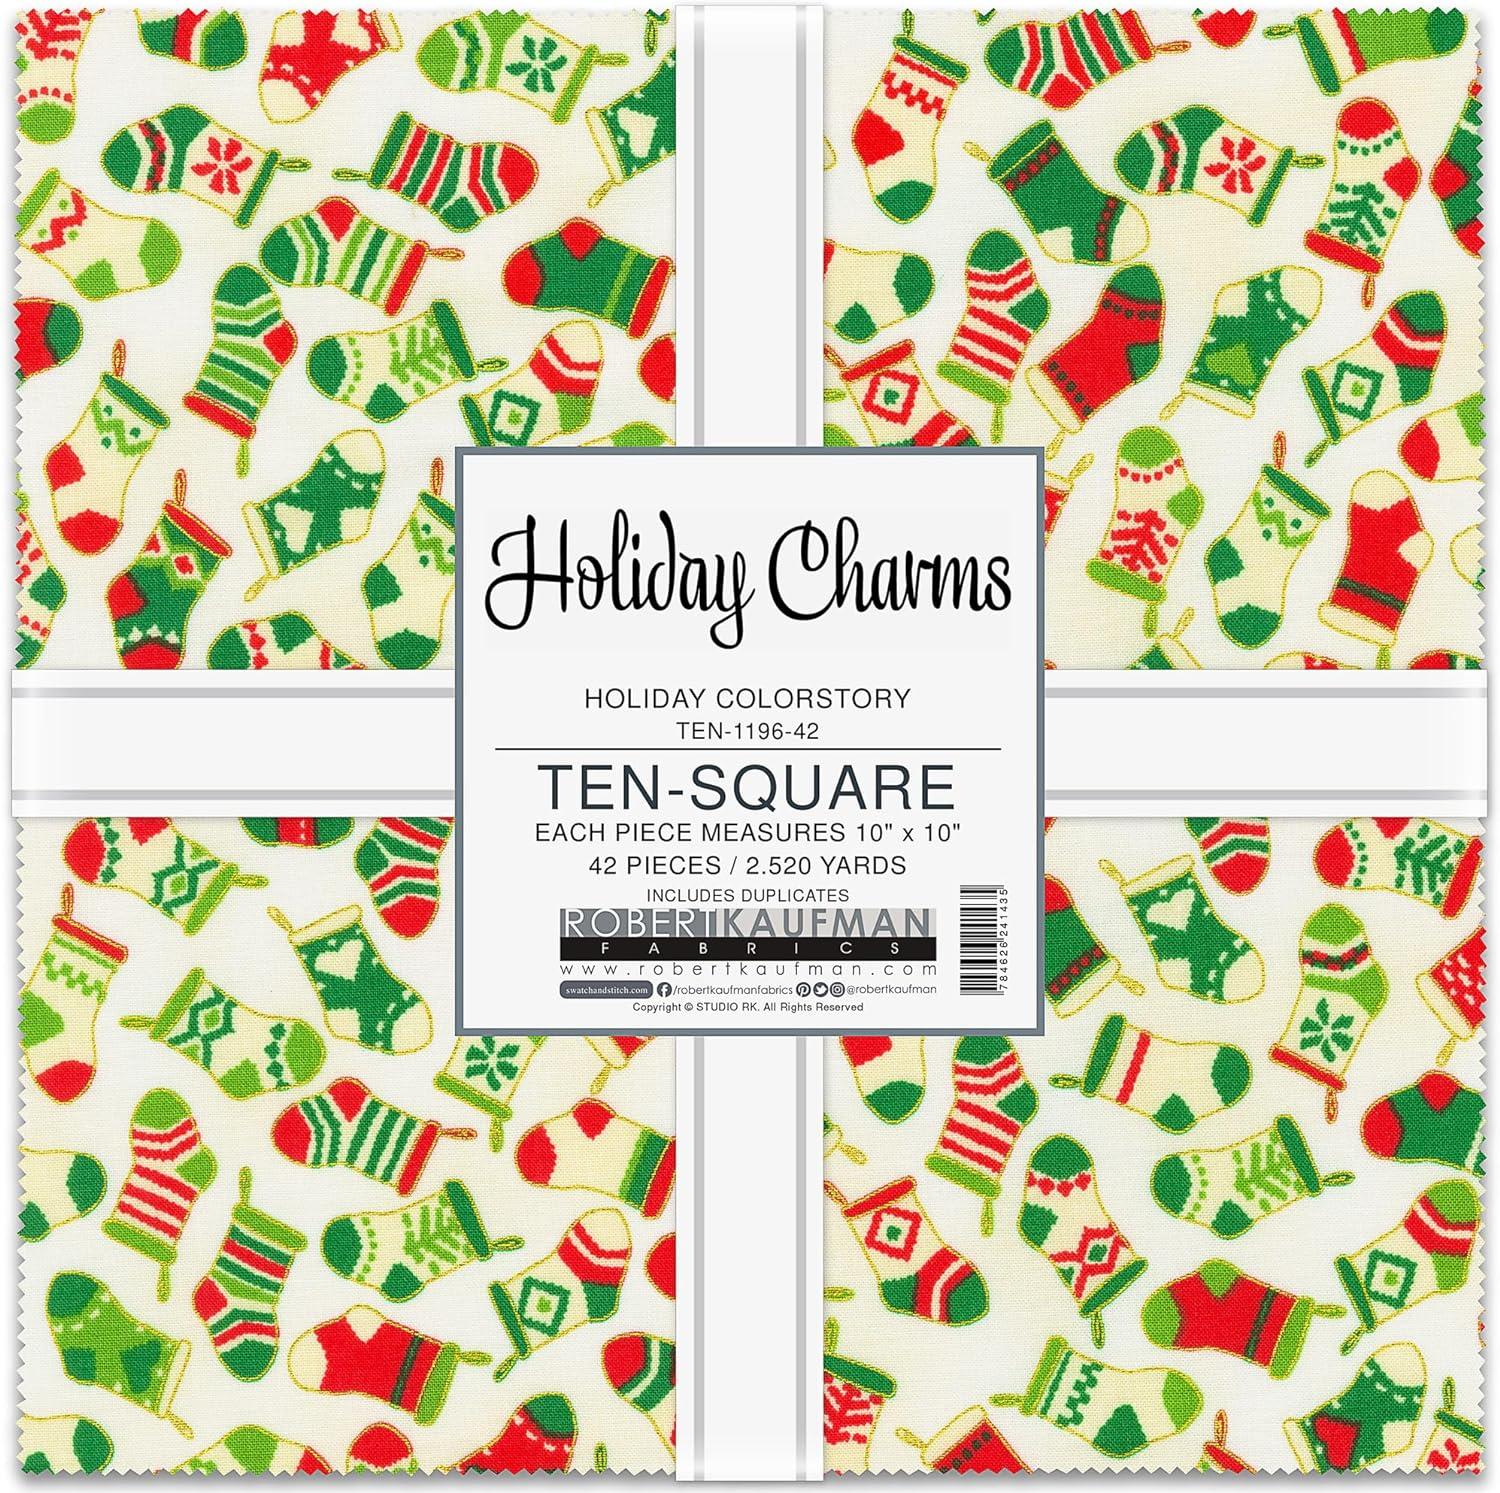 Holiday Charms 10" Square